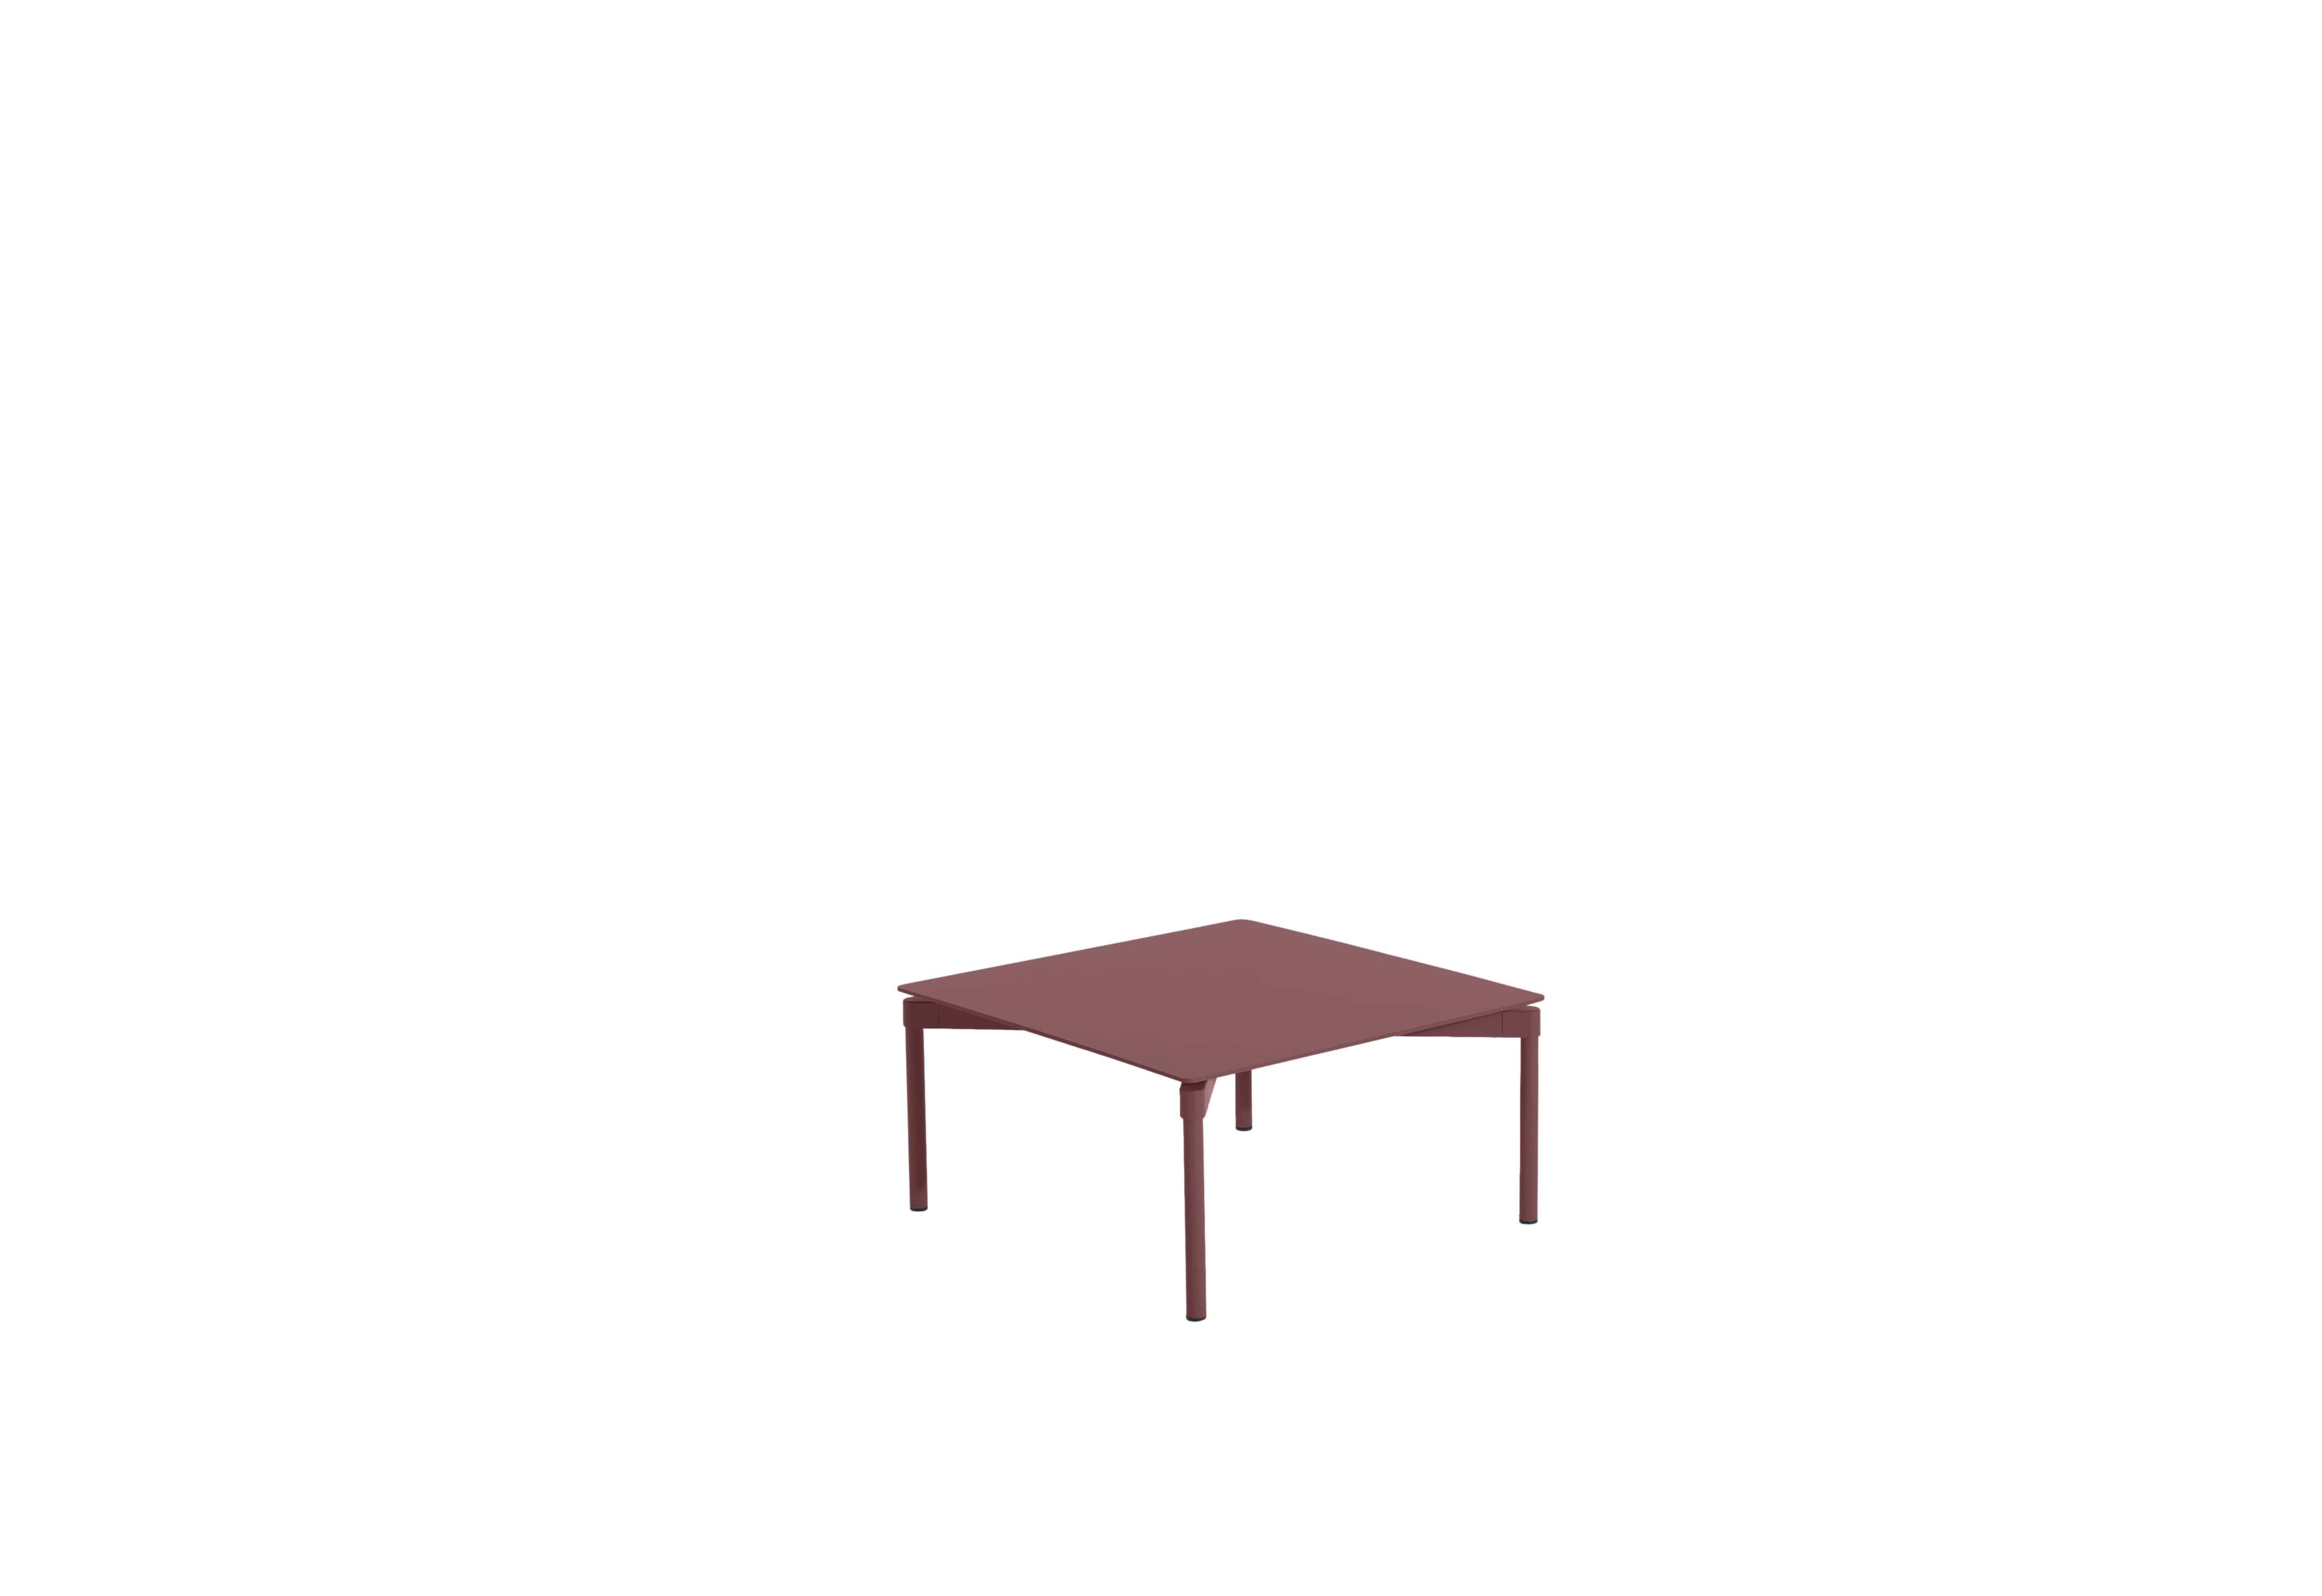 Petite Friture Fromme Coffee Table in Brown-red Aluminium by Tom Chung, 2020

The Fromme collection stands out by its pure line and compact design. Absorbers placed under the seating gives a soft and very comfortable flexibility to seats. Made